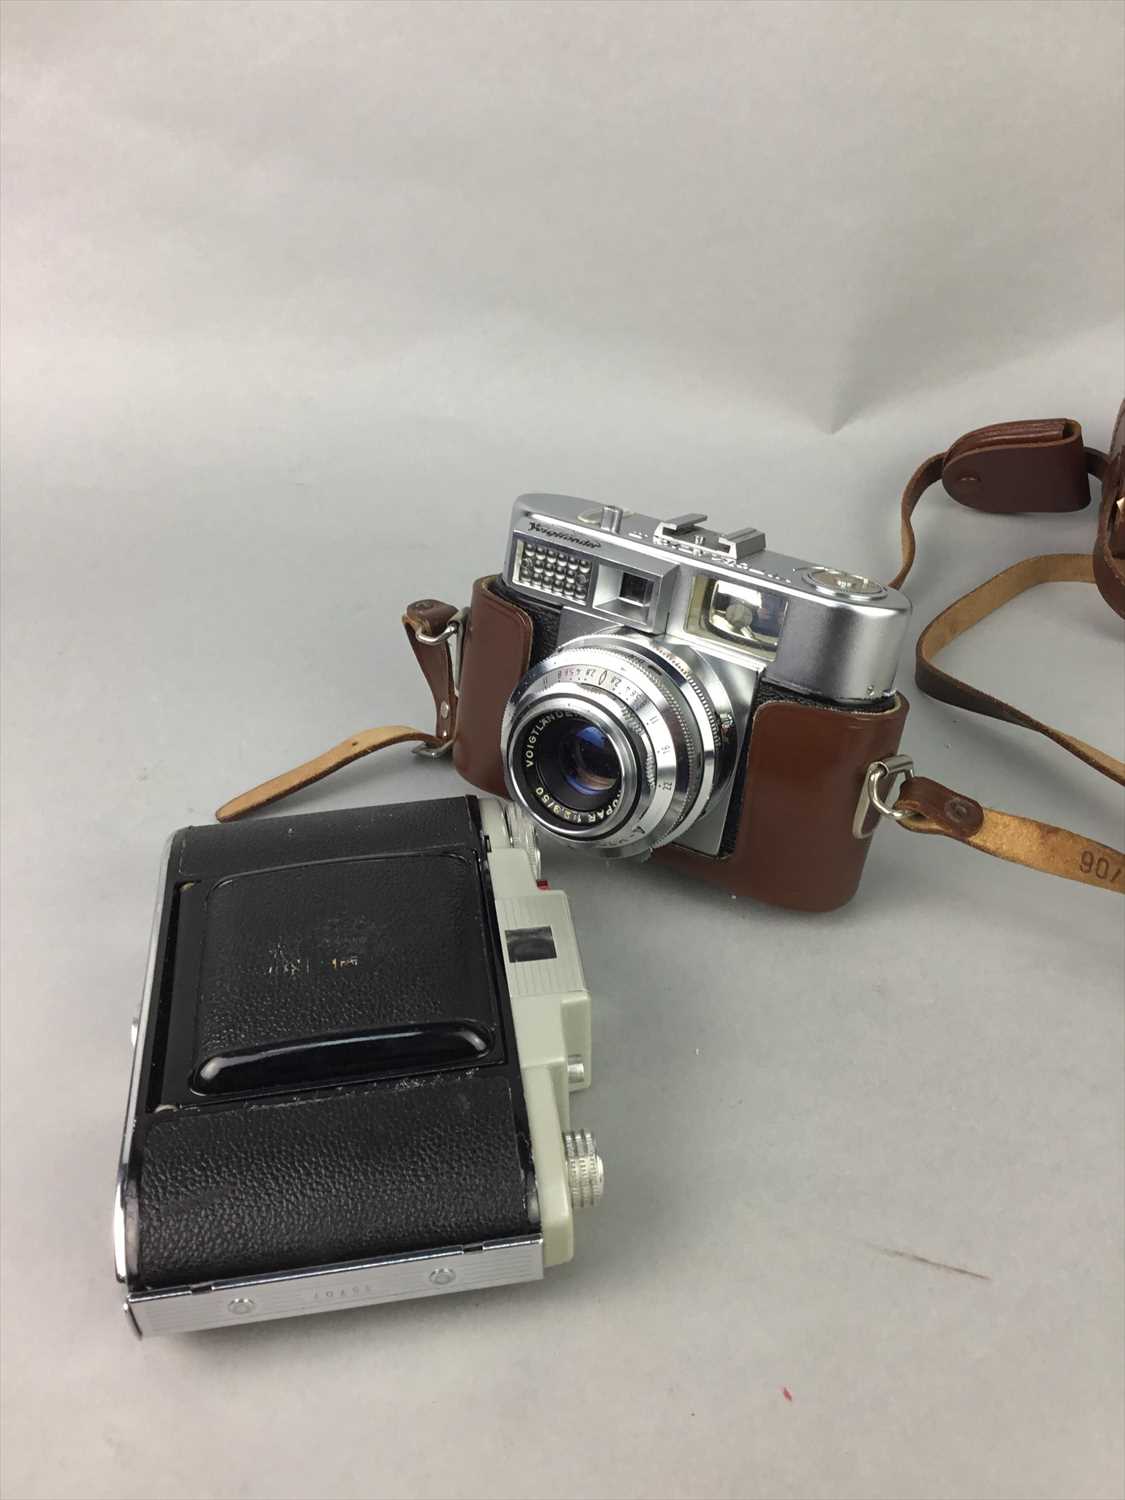 Lot 26 - A VOIGTLANDER VOIGTMATIC II CAMERA ALONG WITH OTHER